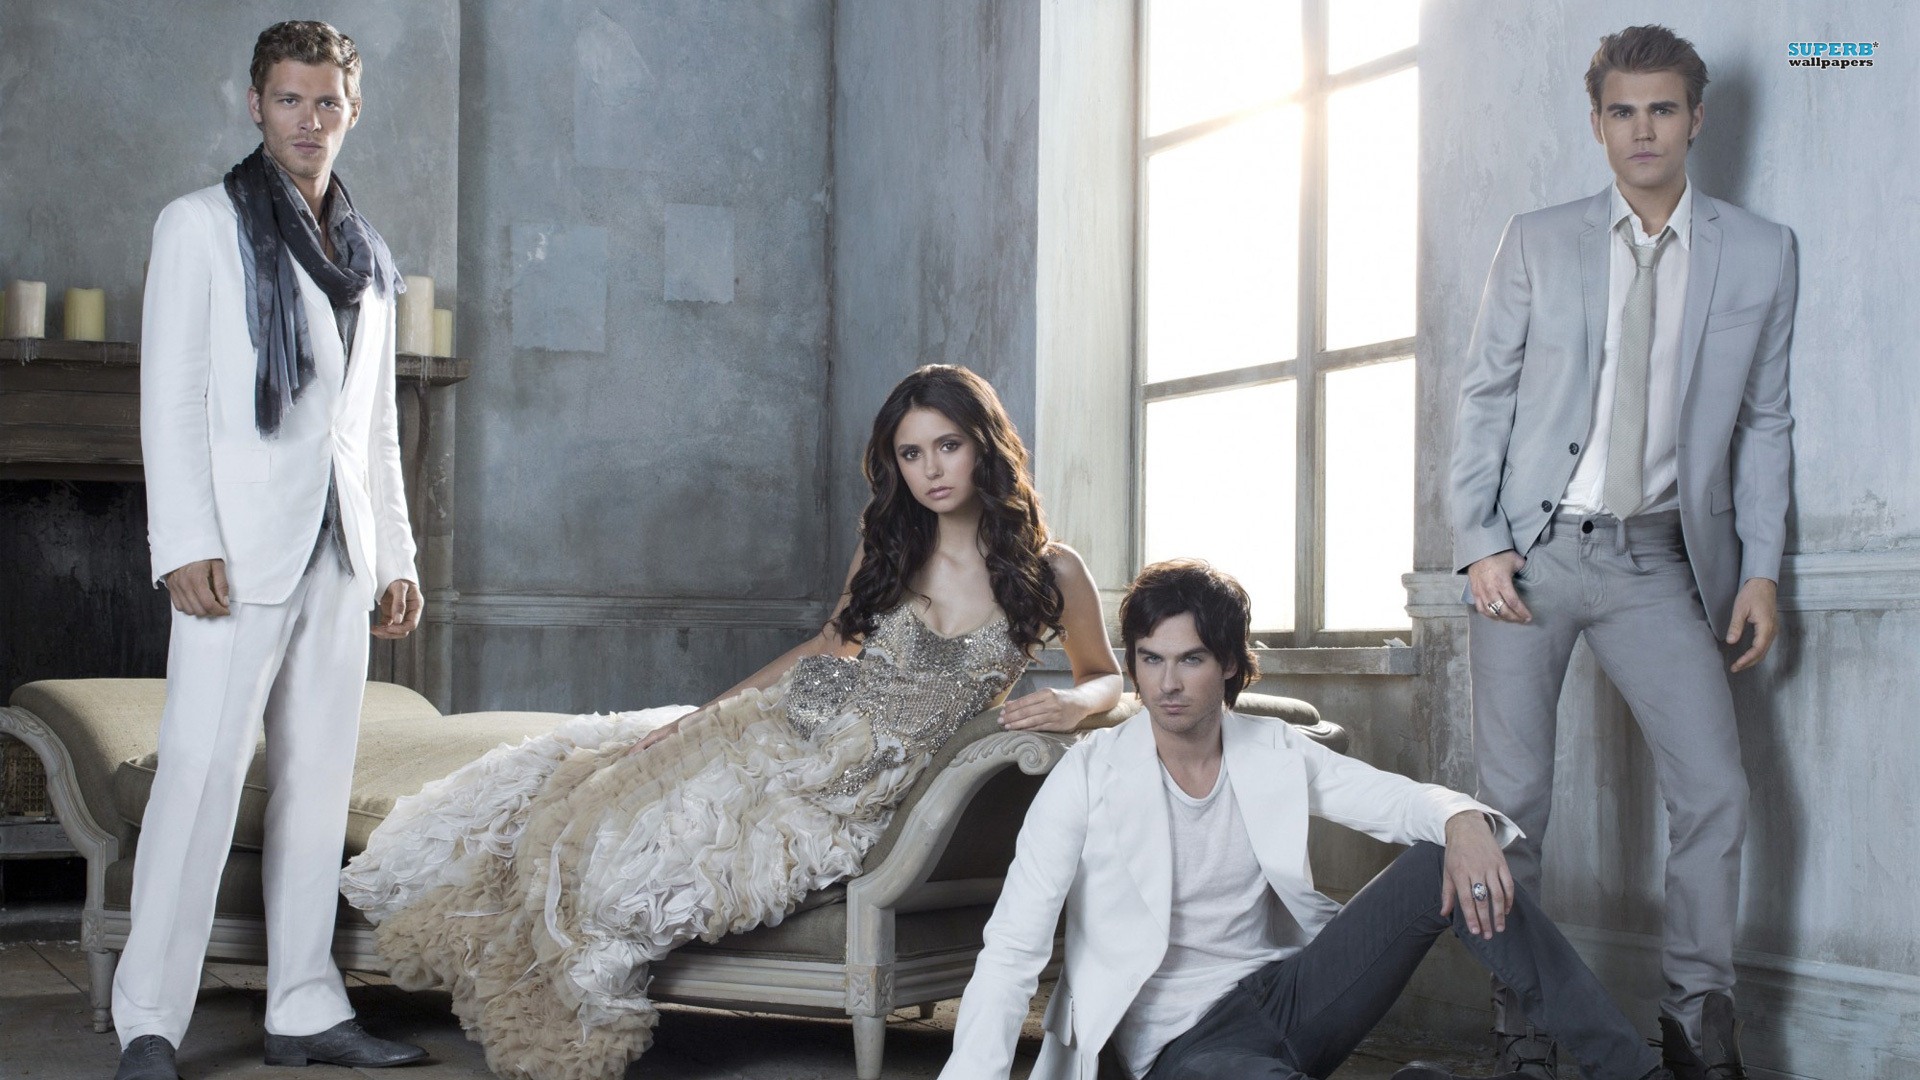 The Vampire Diaries HD Wallpapers #8 - 1920x1080